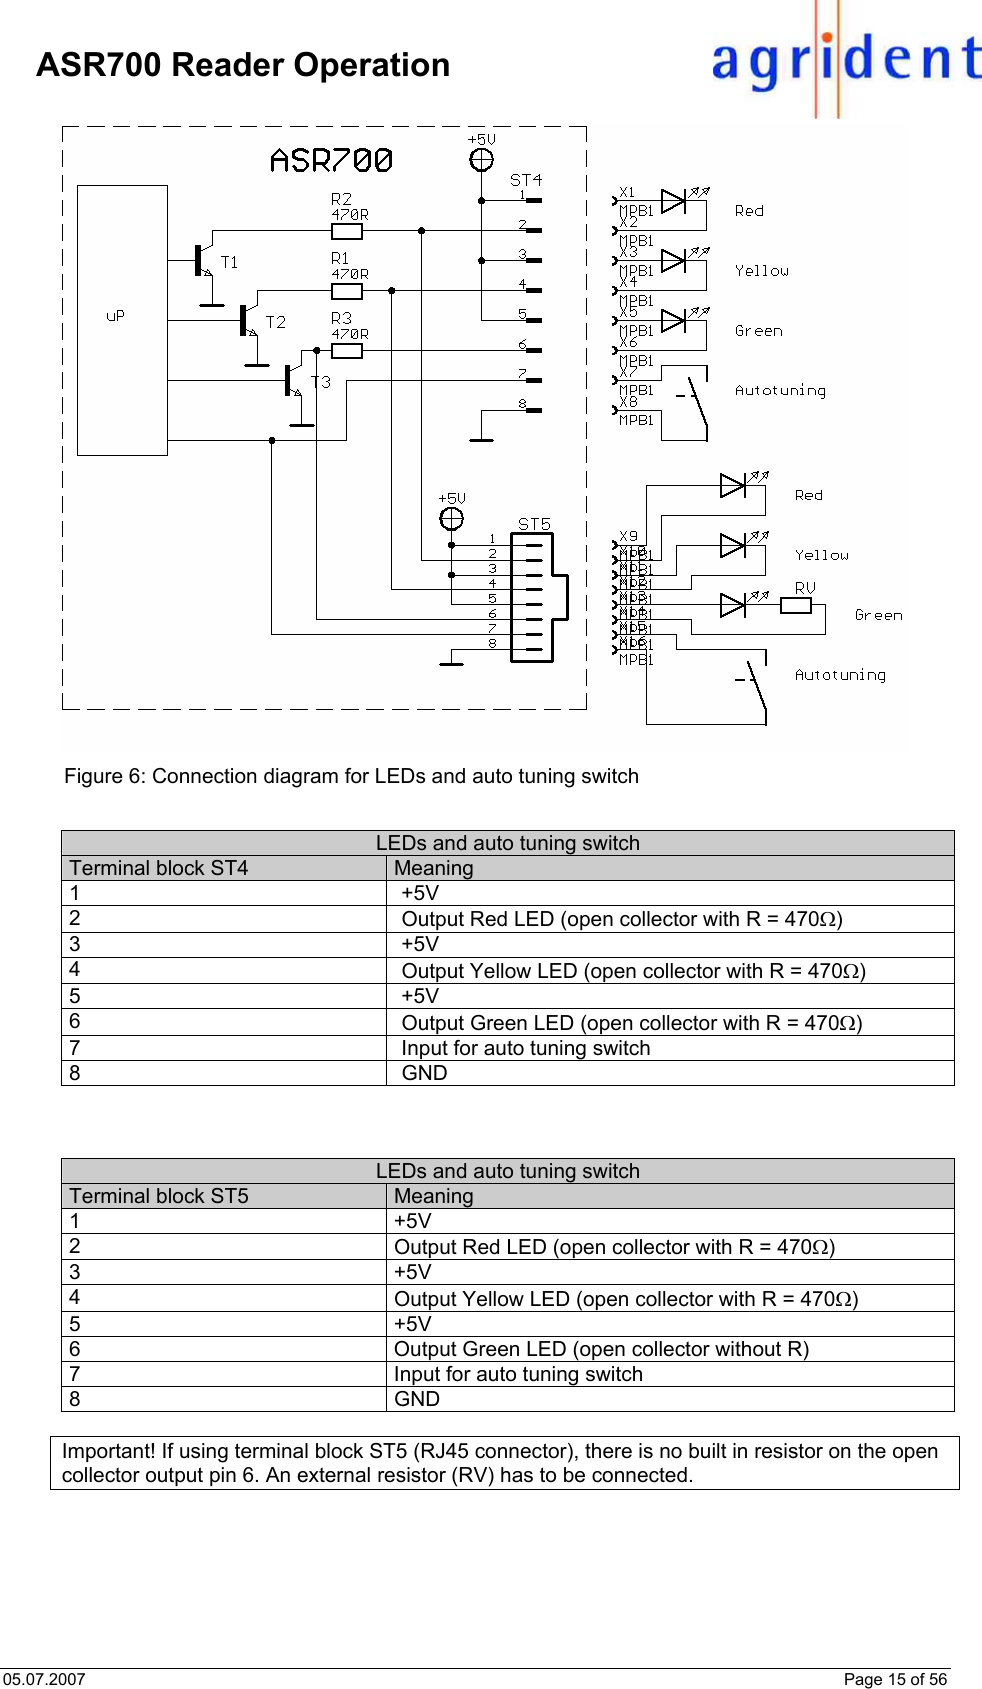 05.07.2007    Page 15 of 56     ASR700 Reader Operation  Figure 6: Connection diagram for LEDs and auto tuning switch  LEDs and auto tuning switch Terminal block ST4  Meaning 1 +5V 2  Output Red LED (open collector with R = 470Ω) 3 +5V 4  Output Yellow LED (open collector with R = 470Ω) 5 +5V 6  Output Green LED (open collector with R = 470Ω) 7  Input for auto tuning switch 8 GND    LEDs and auto tuning switch Terminal block ST5  Meaning 1 +5V 2  Output Red LED (open collector with R = 470Ω) 3 +5V 4  Output Yellow LED (open collector with R = 470Ω) 5 +5V 6  Output Green LED (open collector without R) 7  Input for auto tuning switch 8 GND  Important! If using terminal block ST5 (RJ45 connector), there is no built in resistor on the open collector output pin 6. An external resistor (RV) has to be connected.  